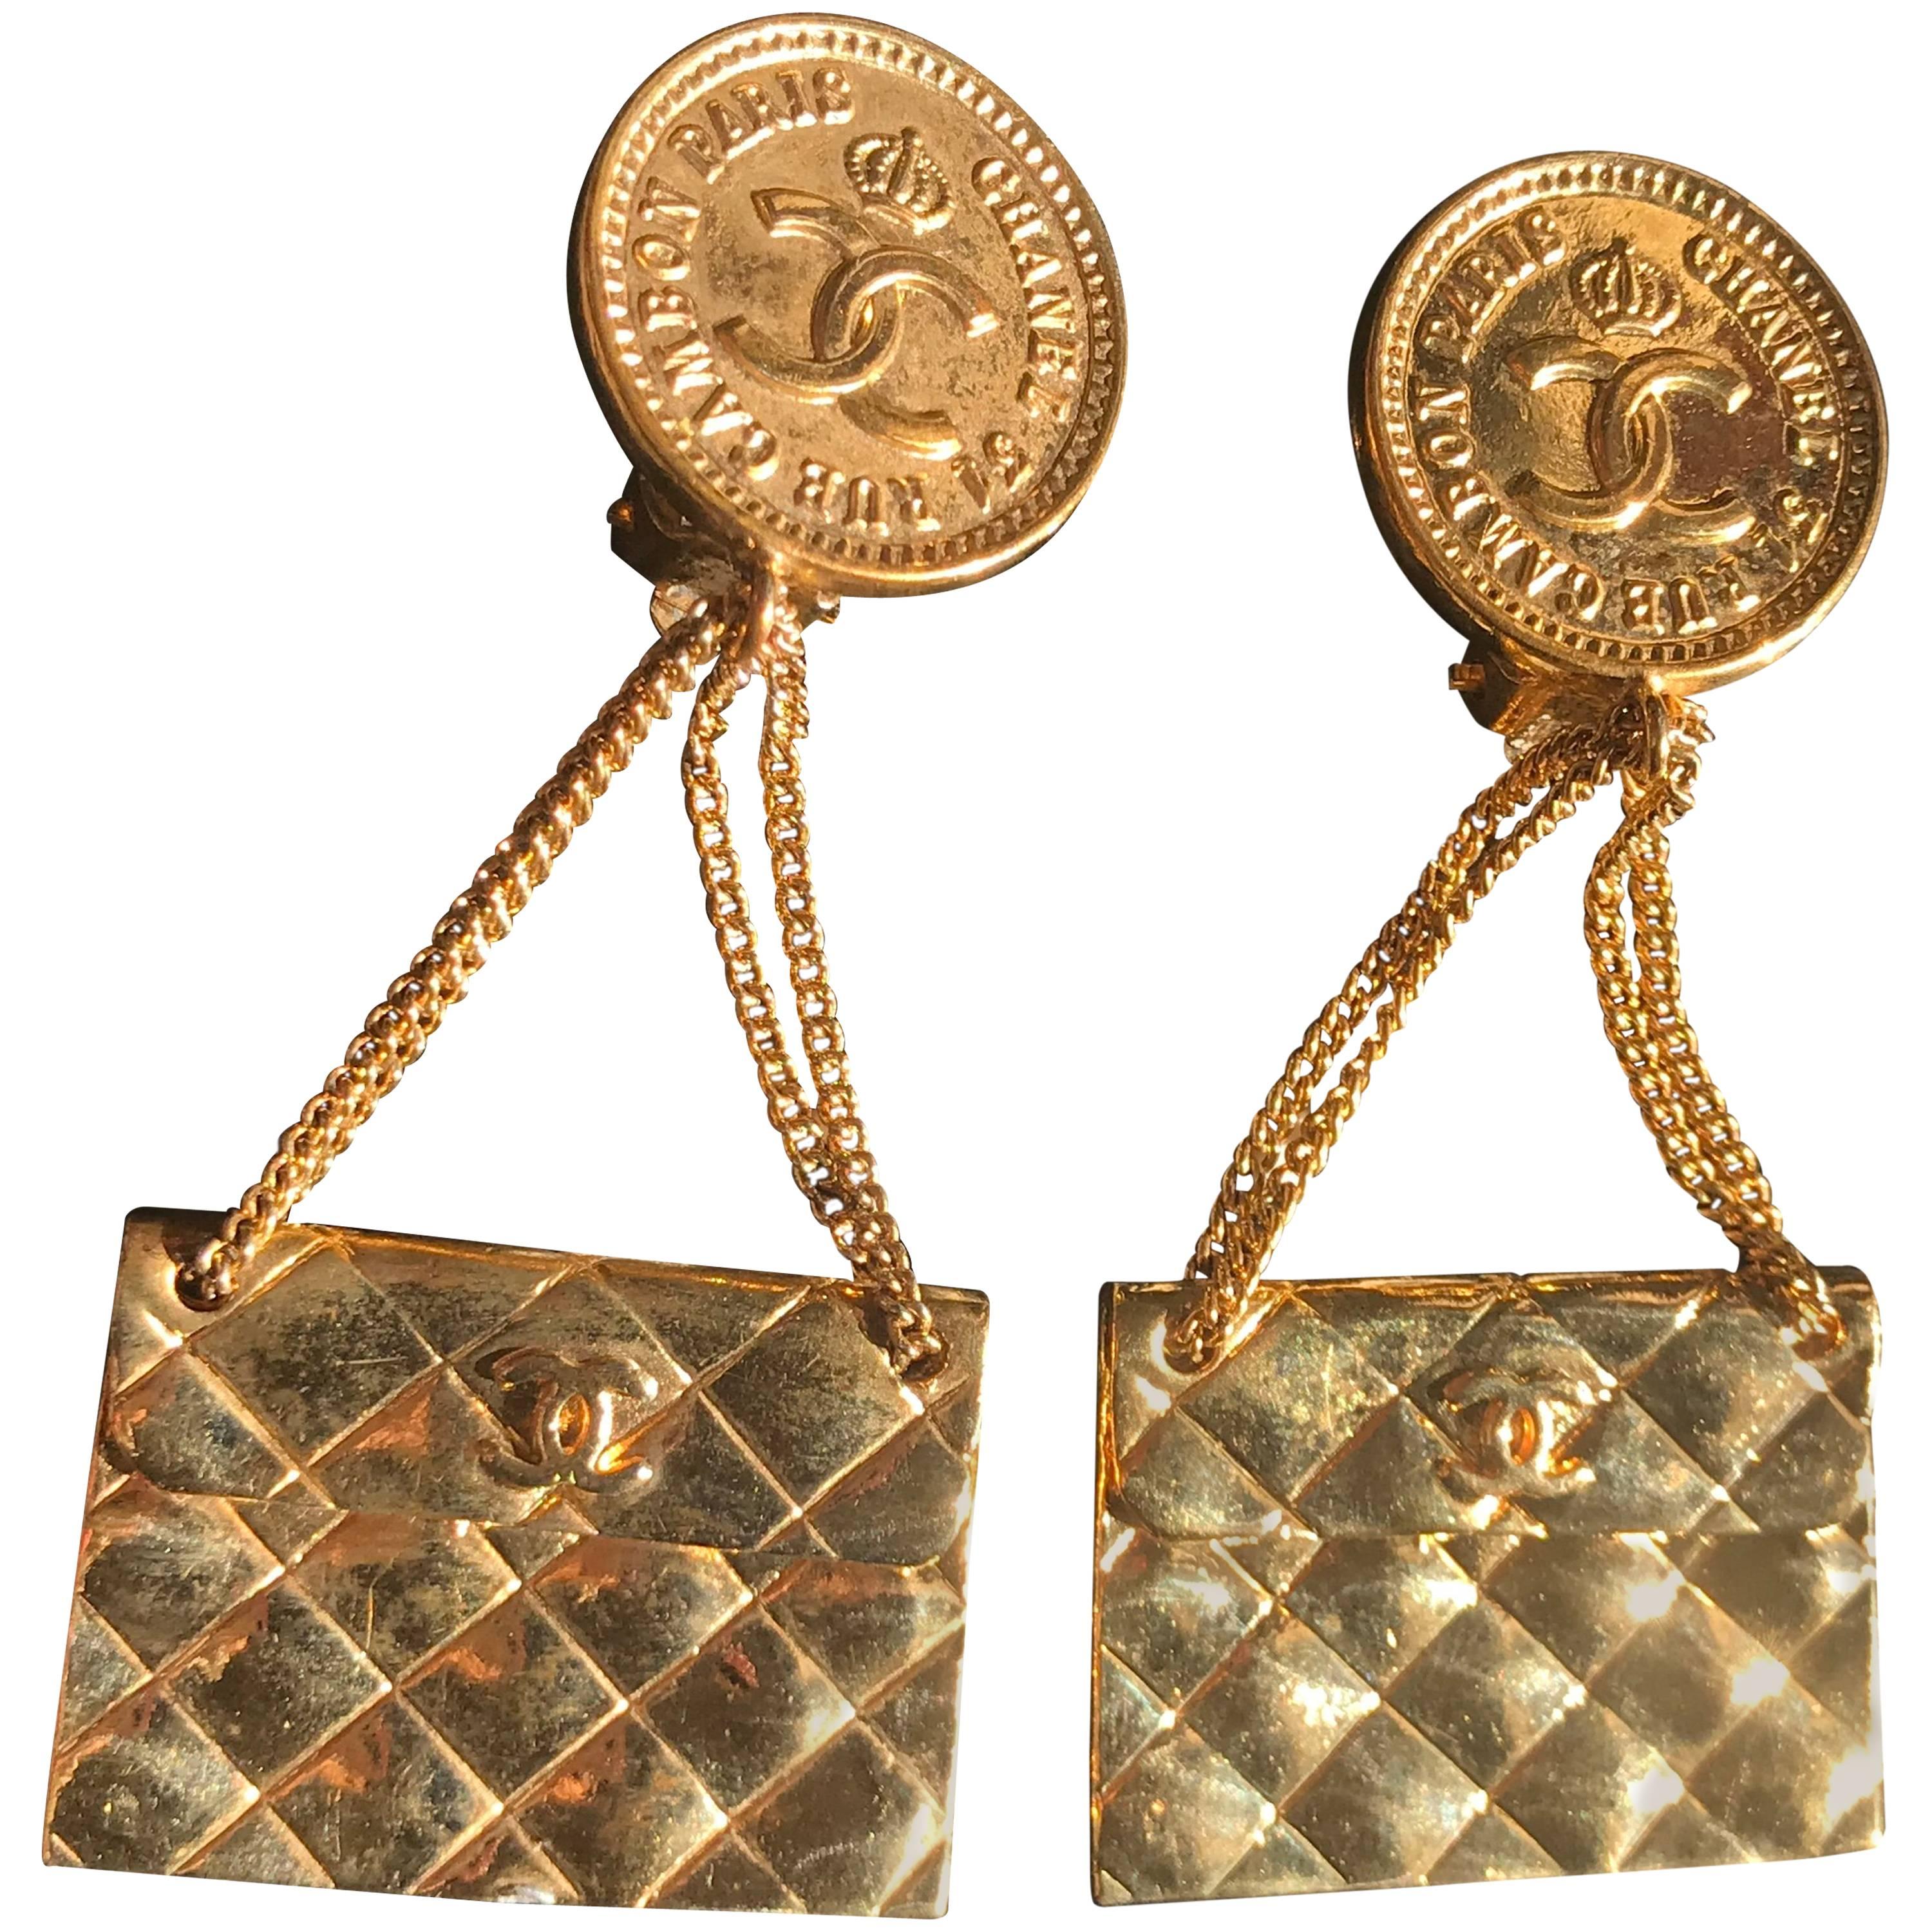 Vintage CHANEL classic 2.55 bag design dangling earrings with CC mark.  For Sale